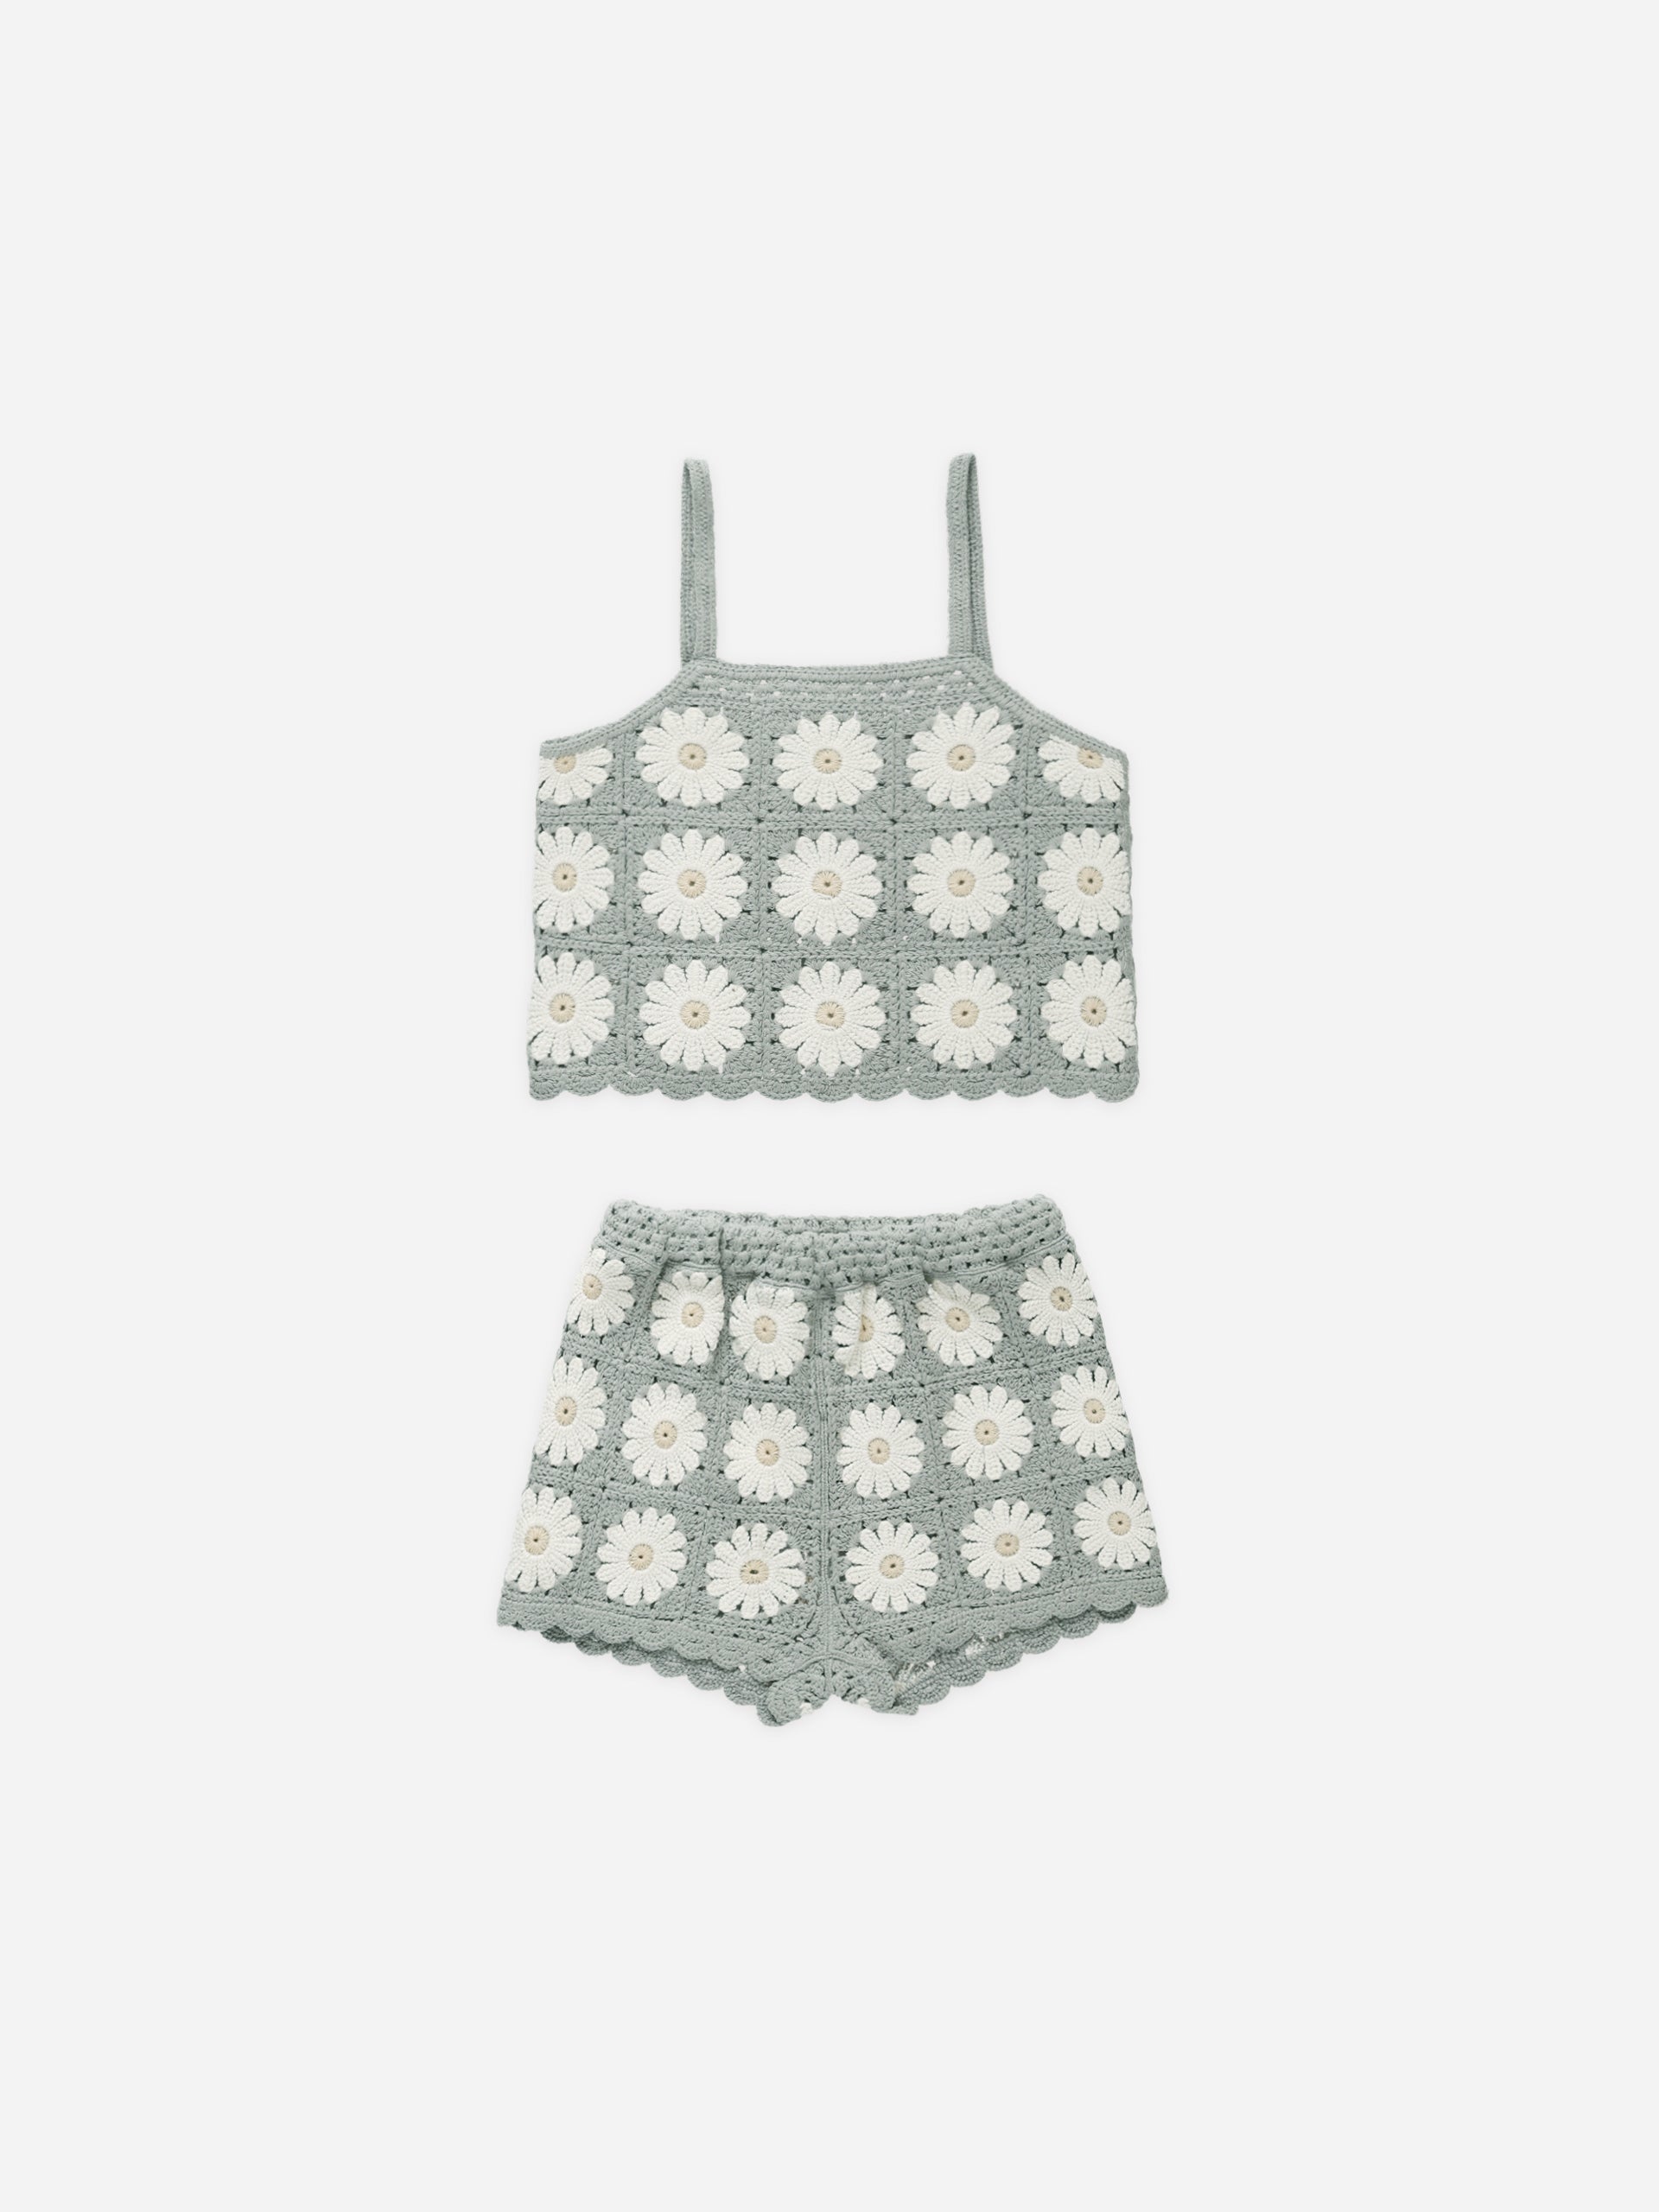 Crochet Summer Set || Daisy - Rylee + Cru | Kids Clothes | Trendy Baby Clothes | Modern Infant Outfits |